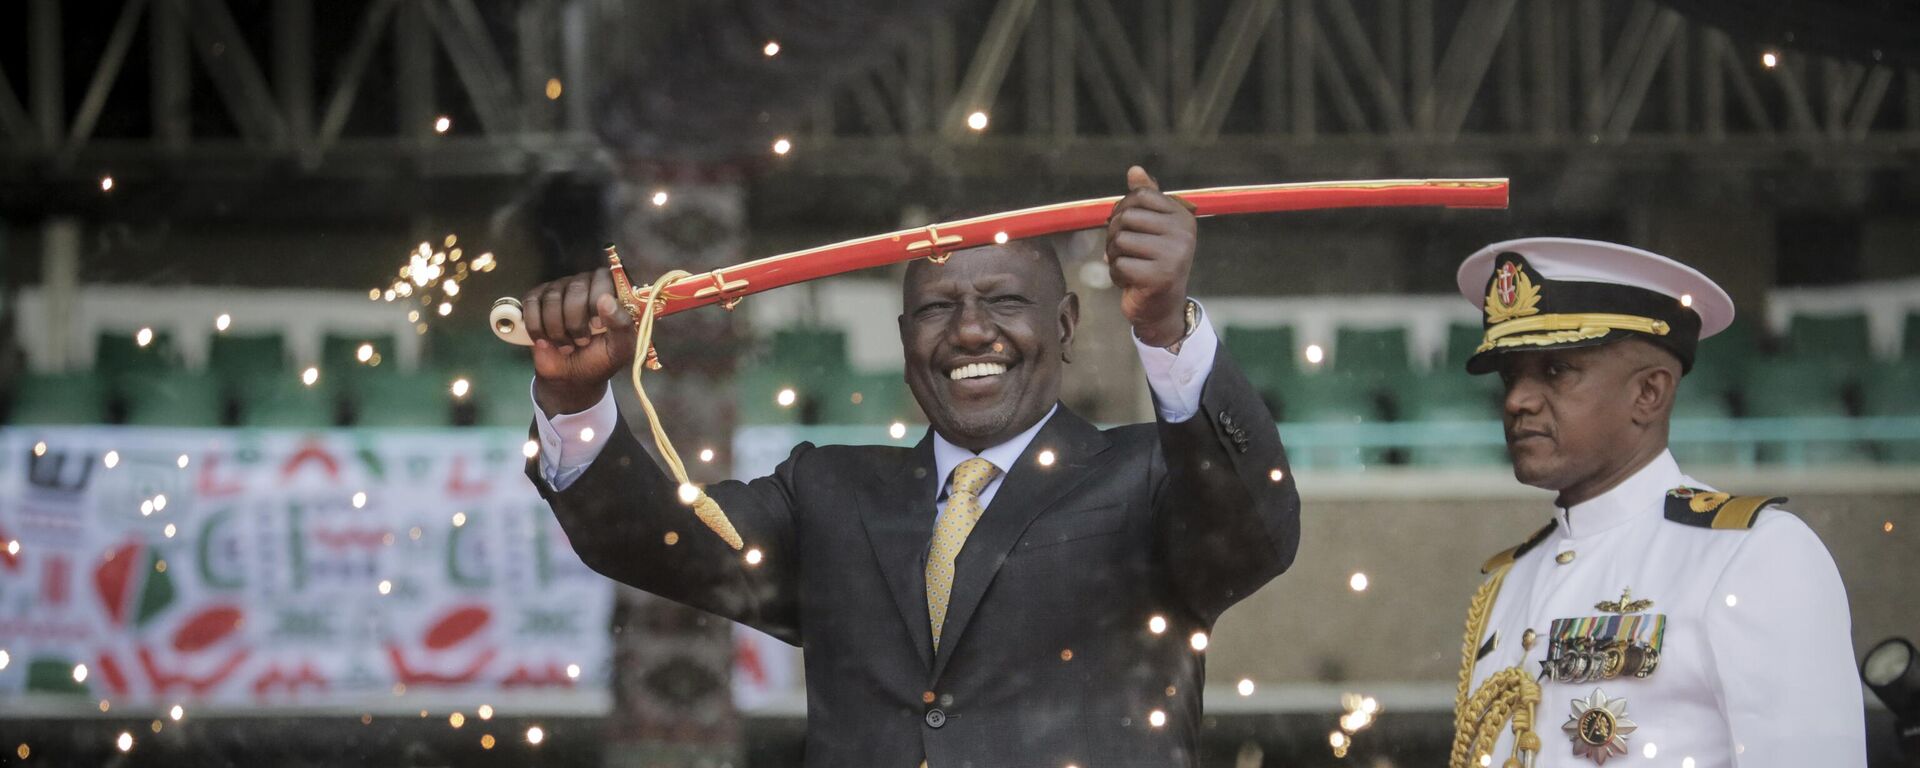 Kenya's new president William Ruto holds up a ceremonial sword as he is sworn in to office at a ceremony held at Kasarani stadium in Nairobi, Kenya Tuesday, Sept. 13, 2022.  - Sputnik International, 1920, 22.12.2022